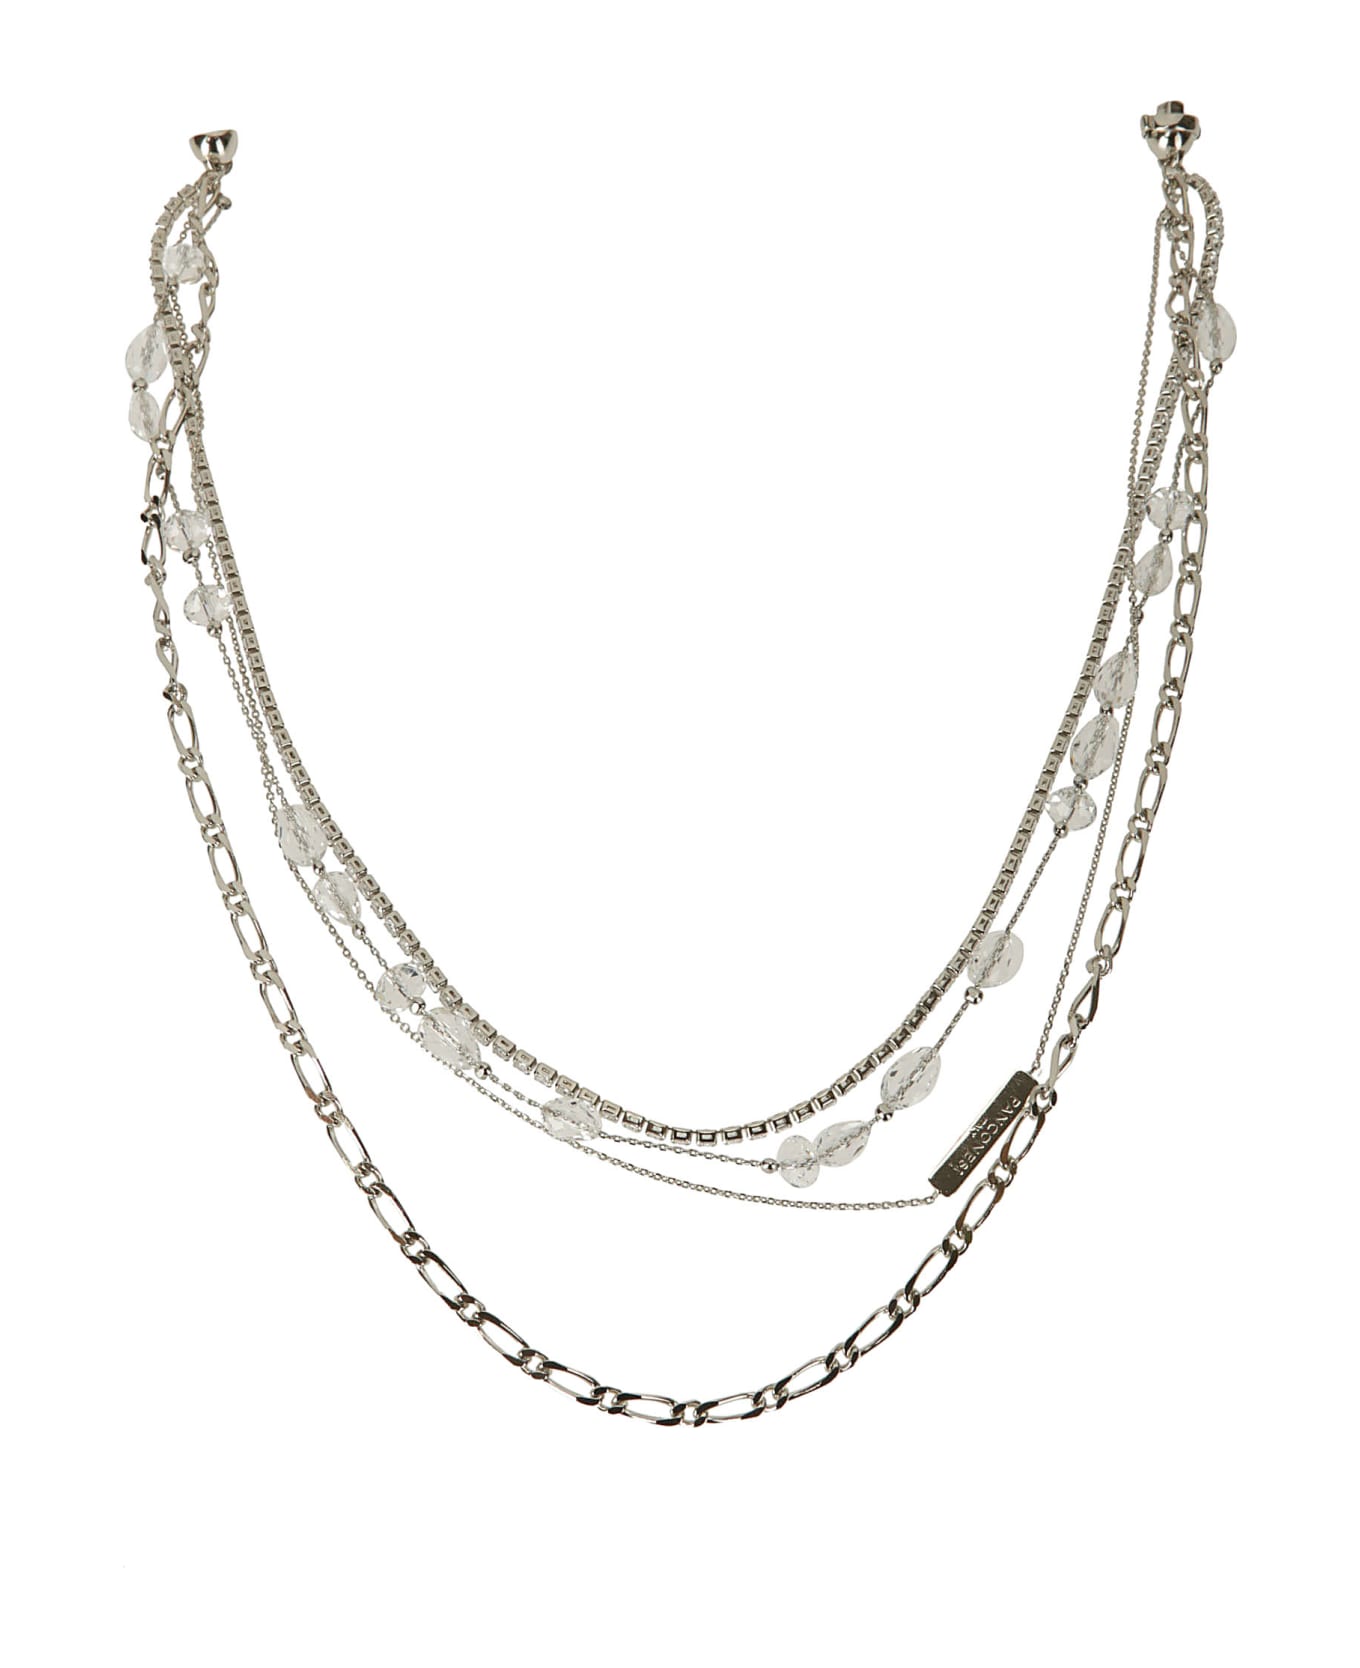 Panconesi Famiglia Silver Necklace - SILVER ネックレス